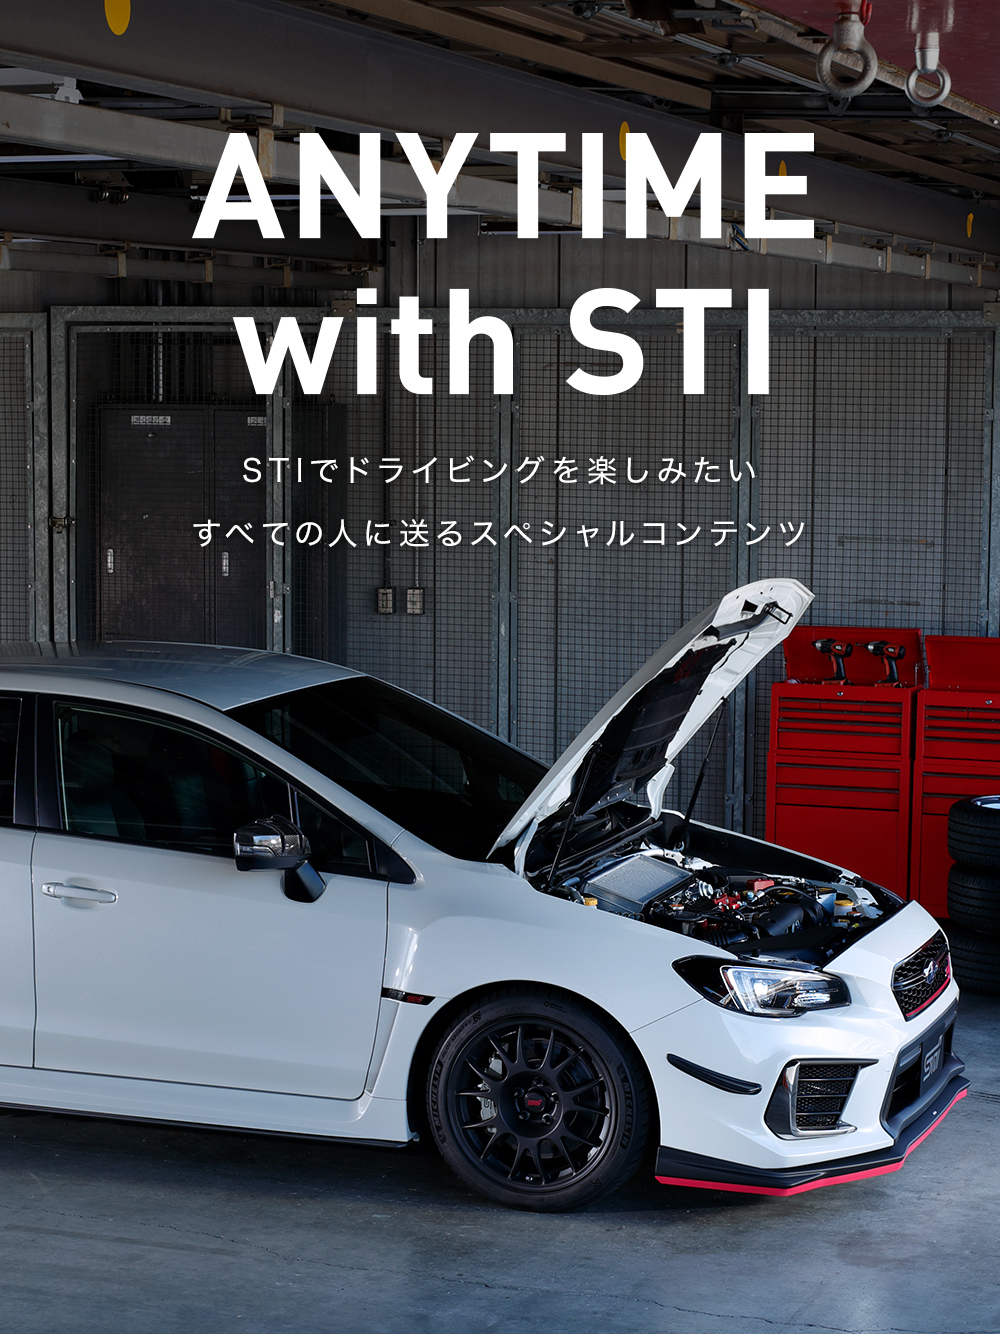 ANYTIME with STI